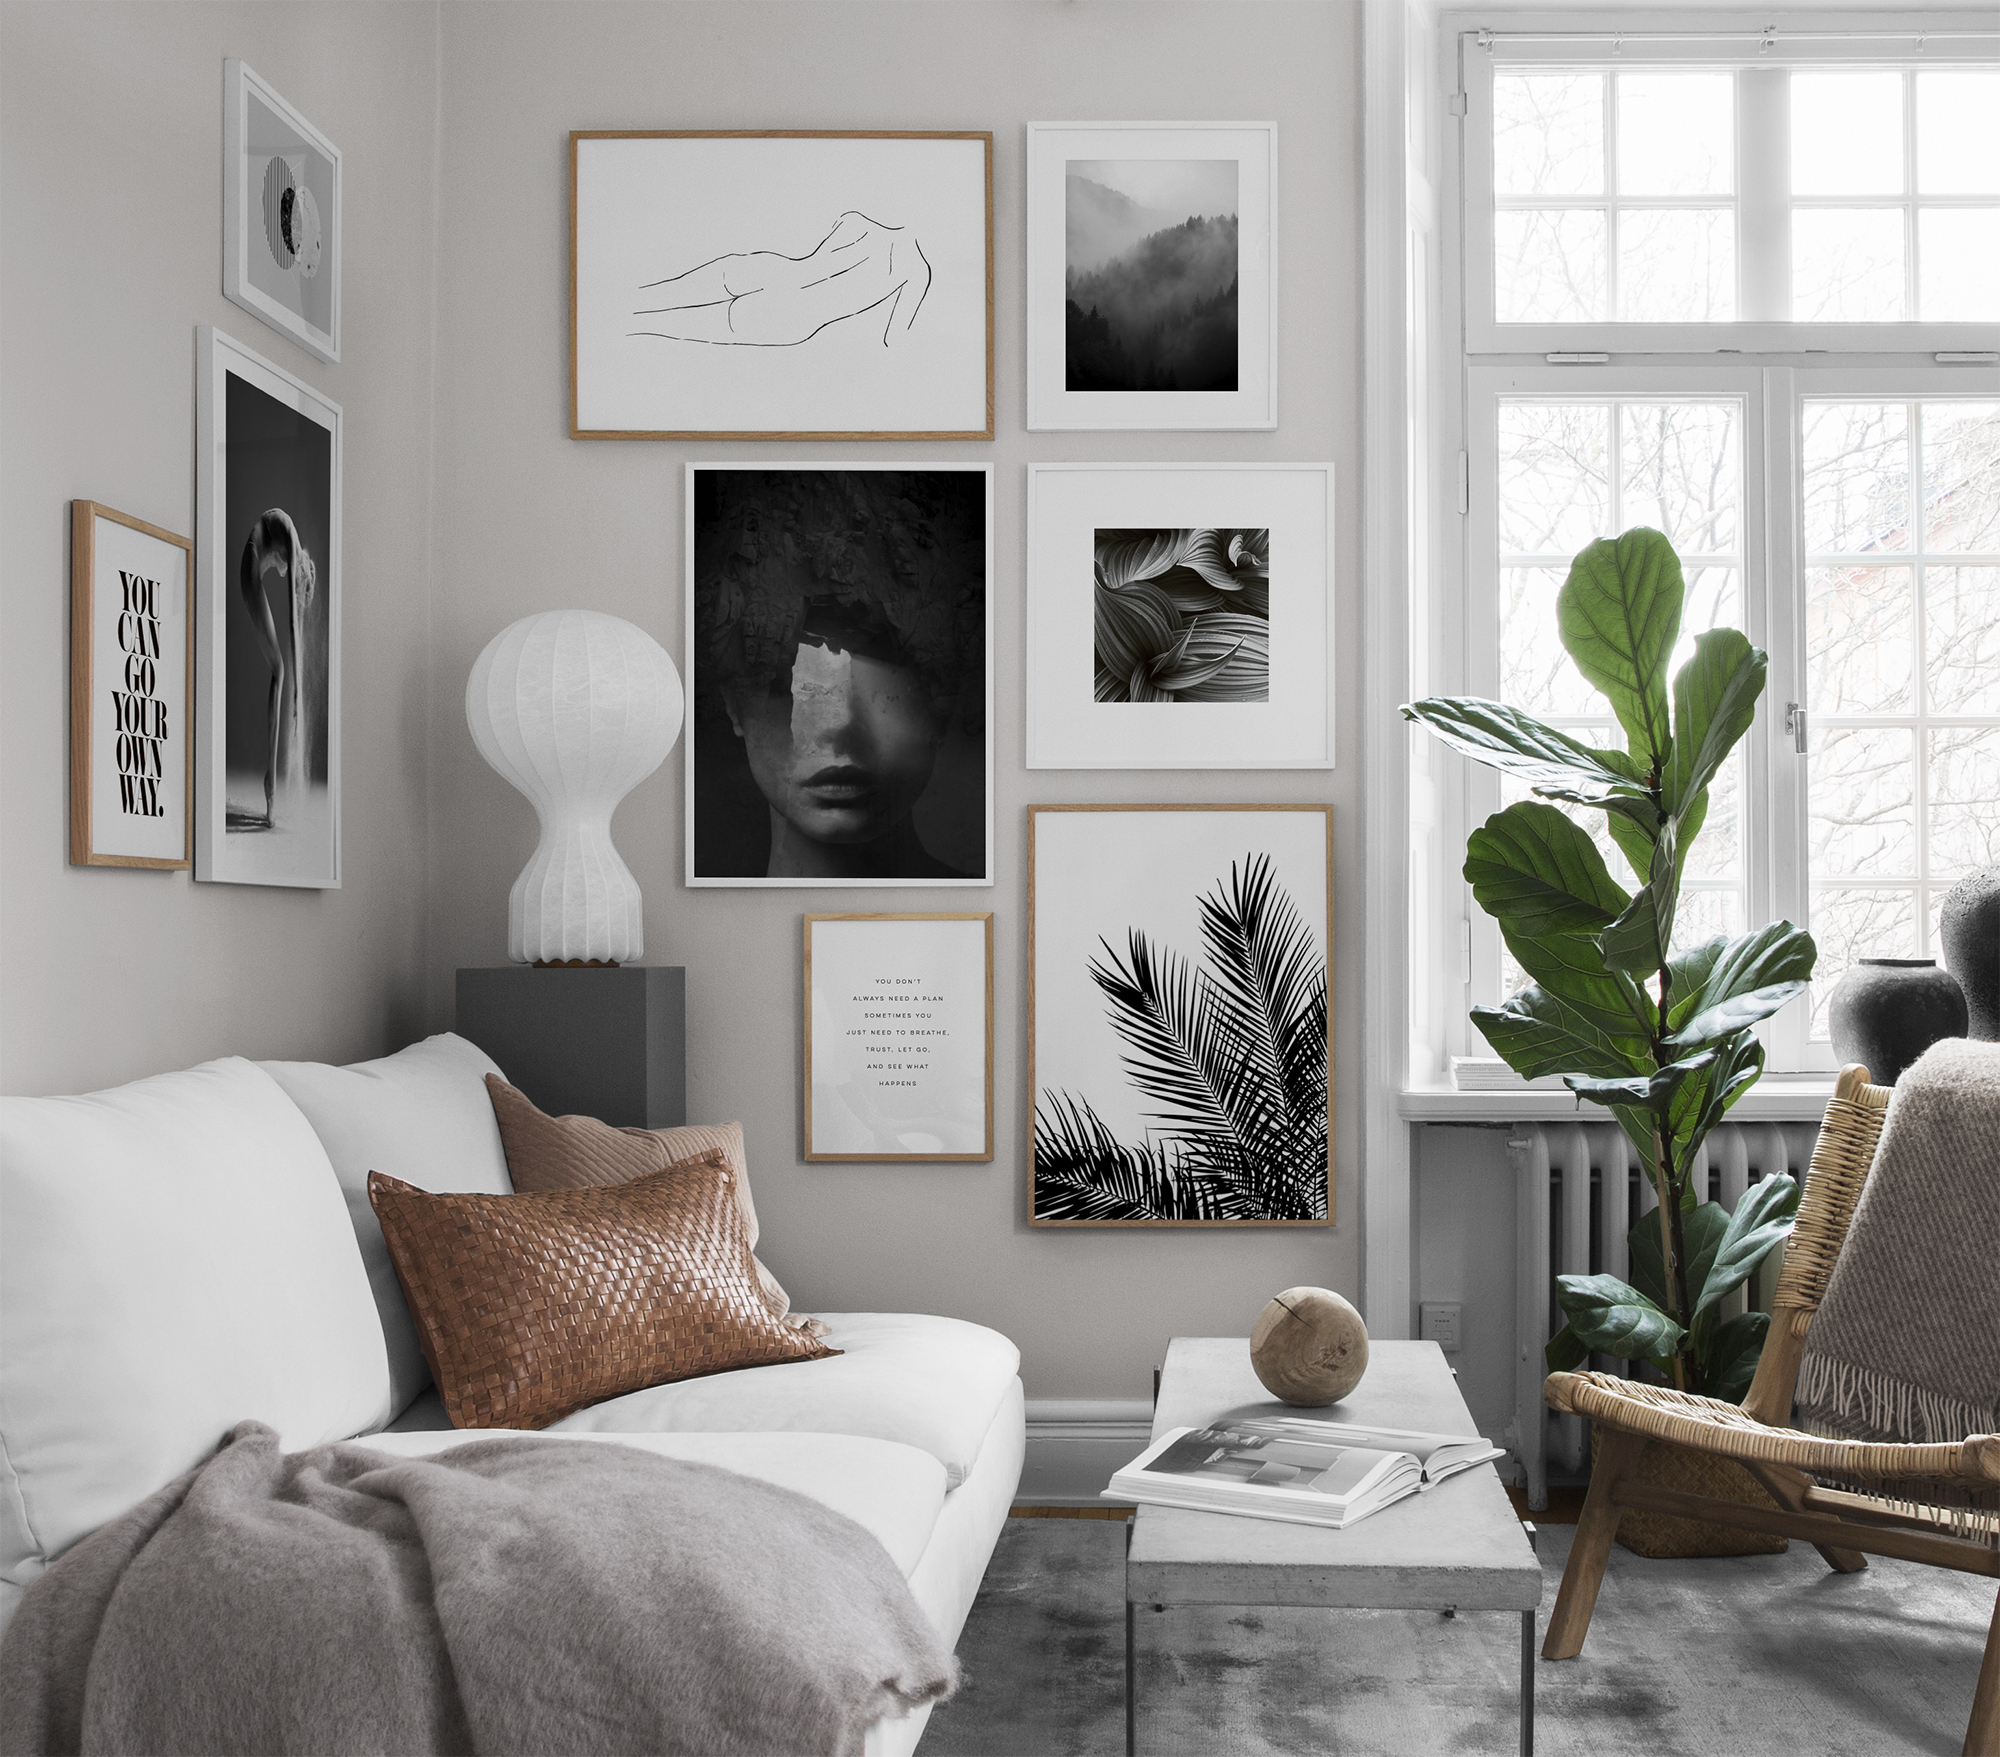 A modern living room idea by Desenio with a gallery wall and tall houseplant